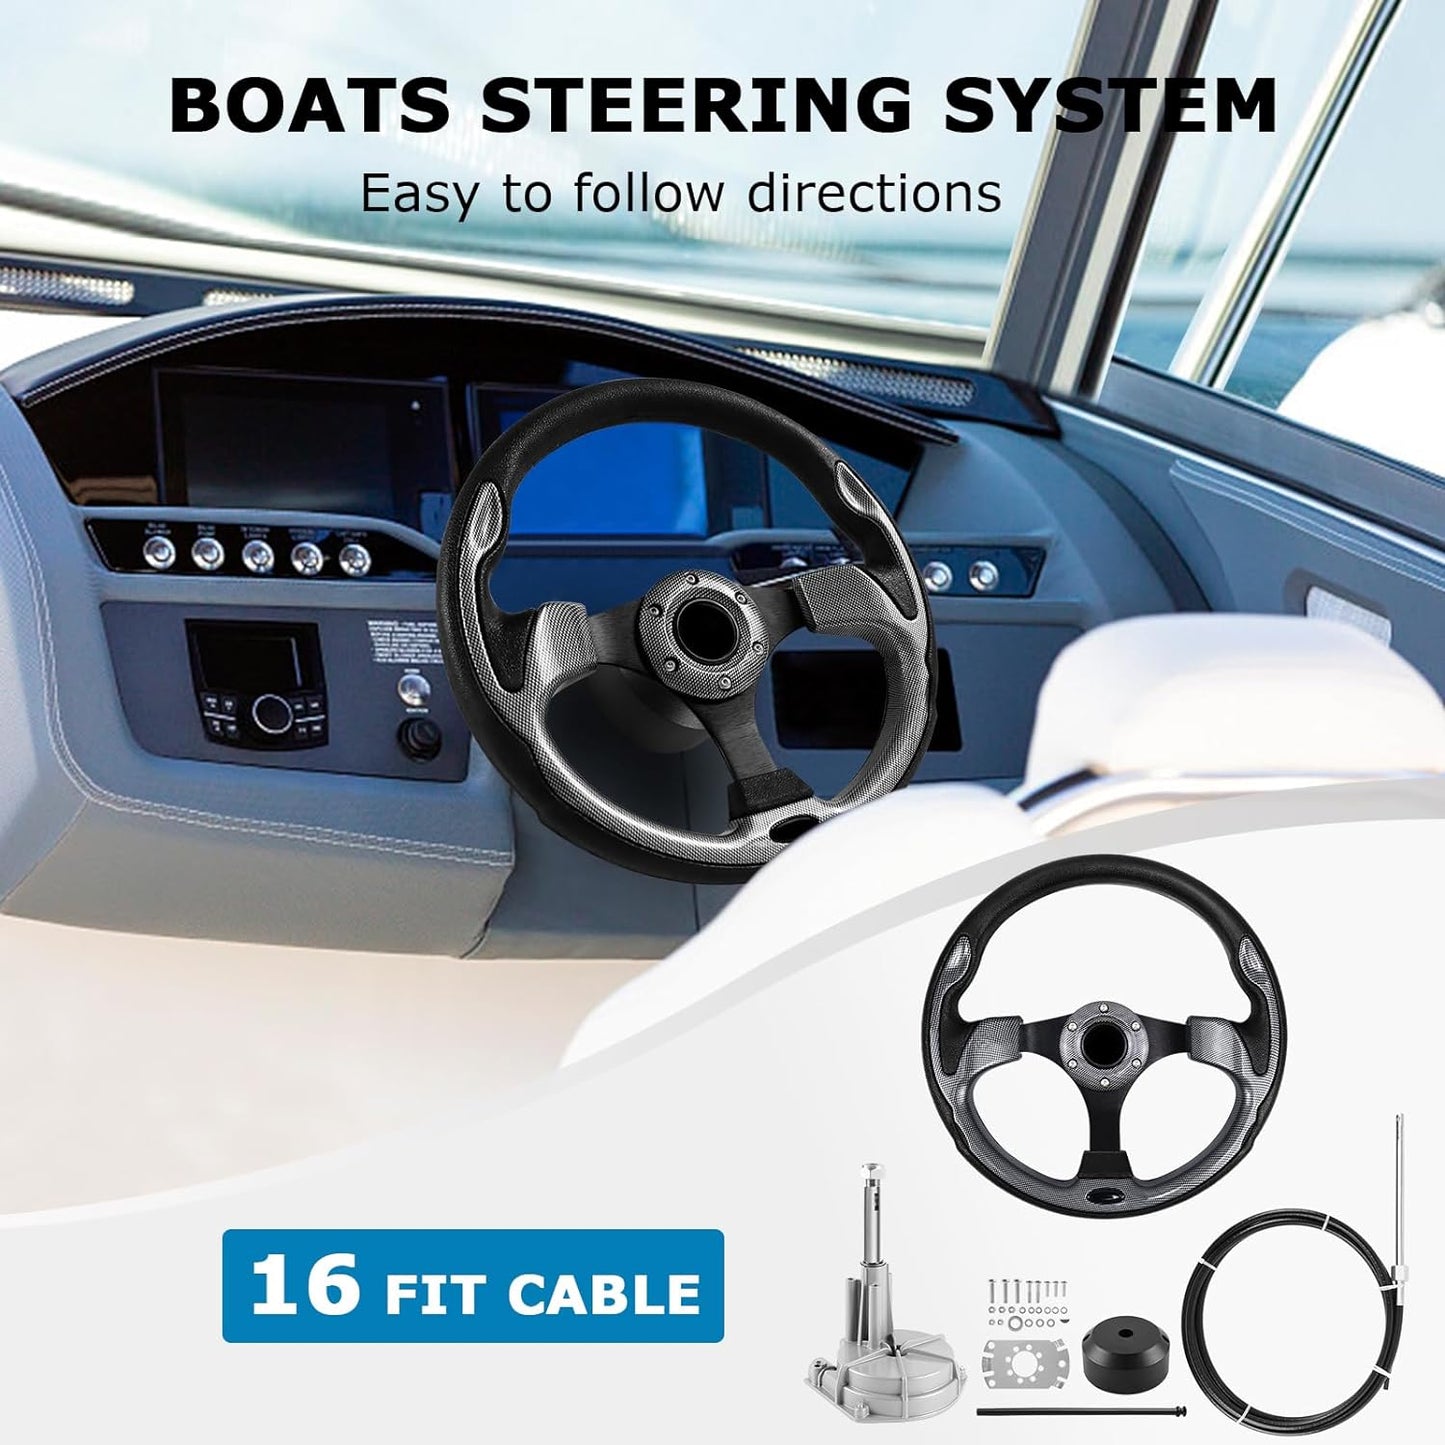 MOTAFAR Boats Steering System 10/12/13/14/15/16 feet Cable Control Cable Outboard Mechanical Rotary Steering Kit (16 feet Cable)